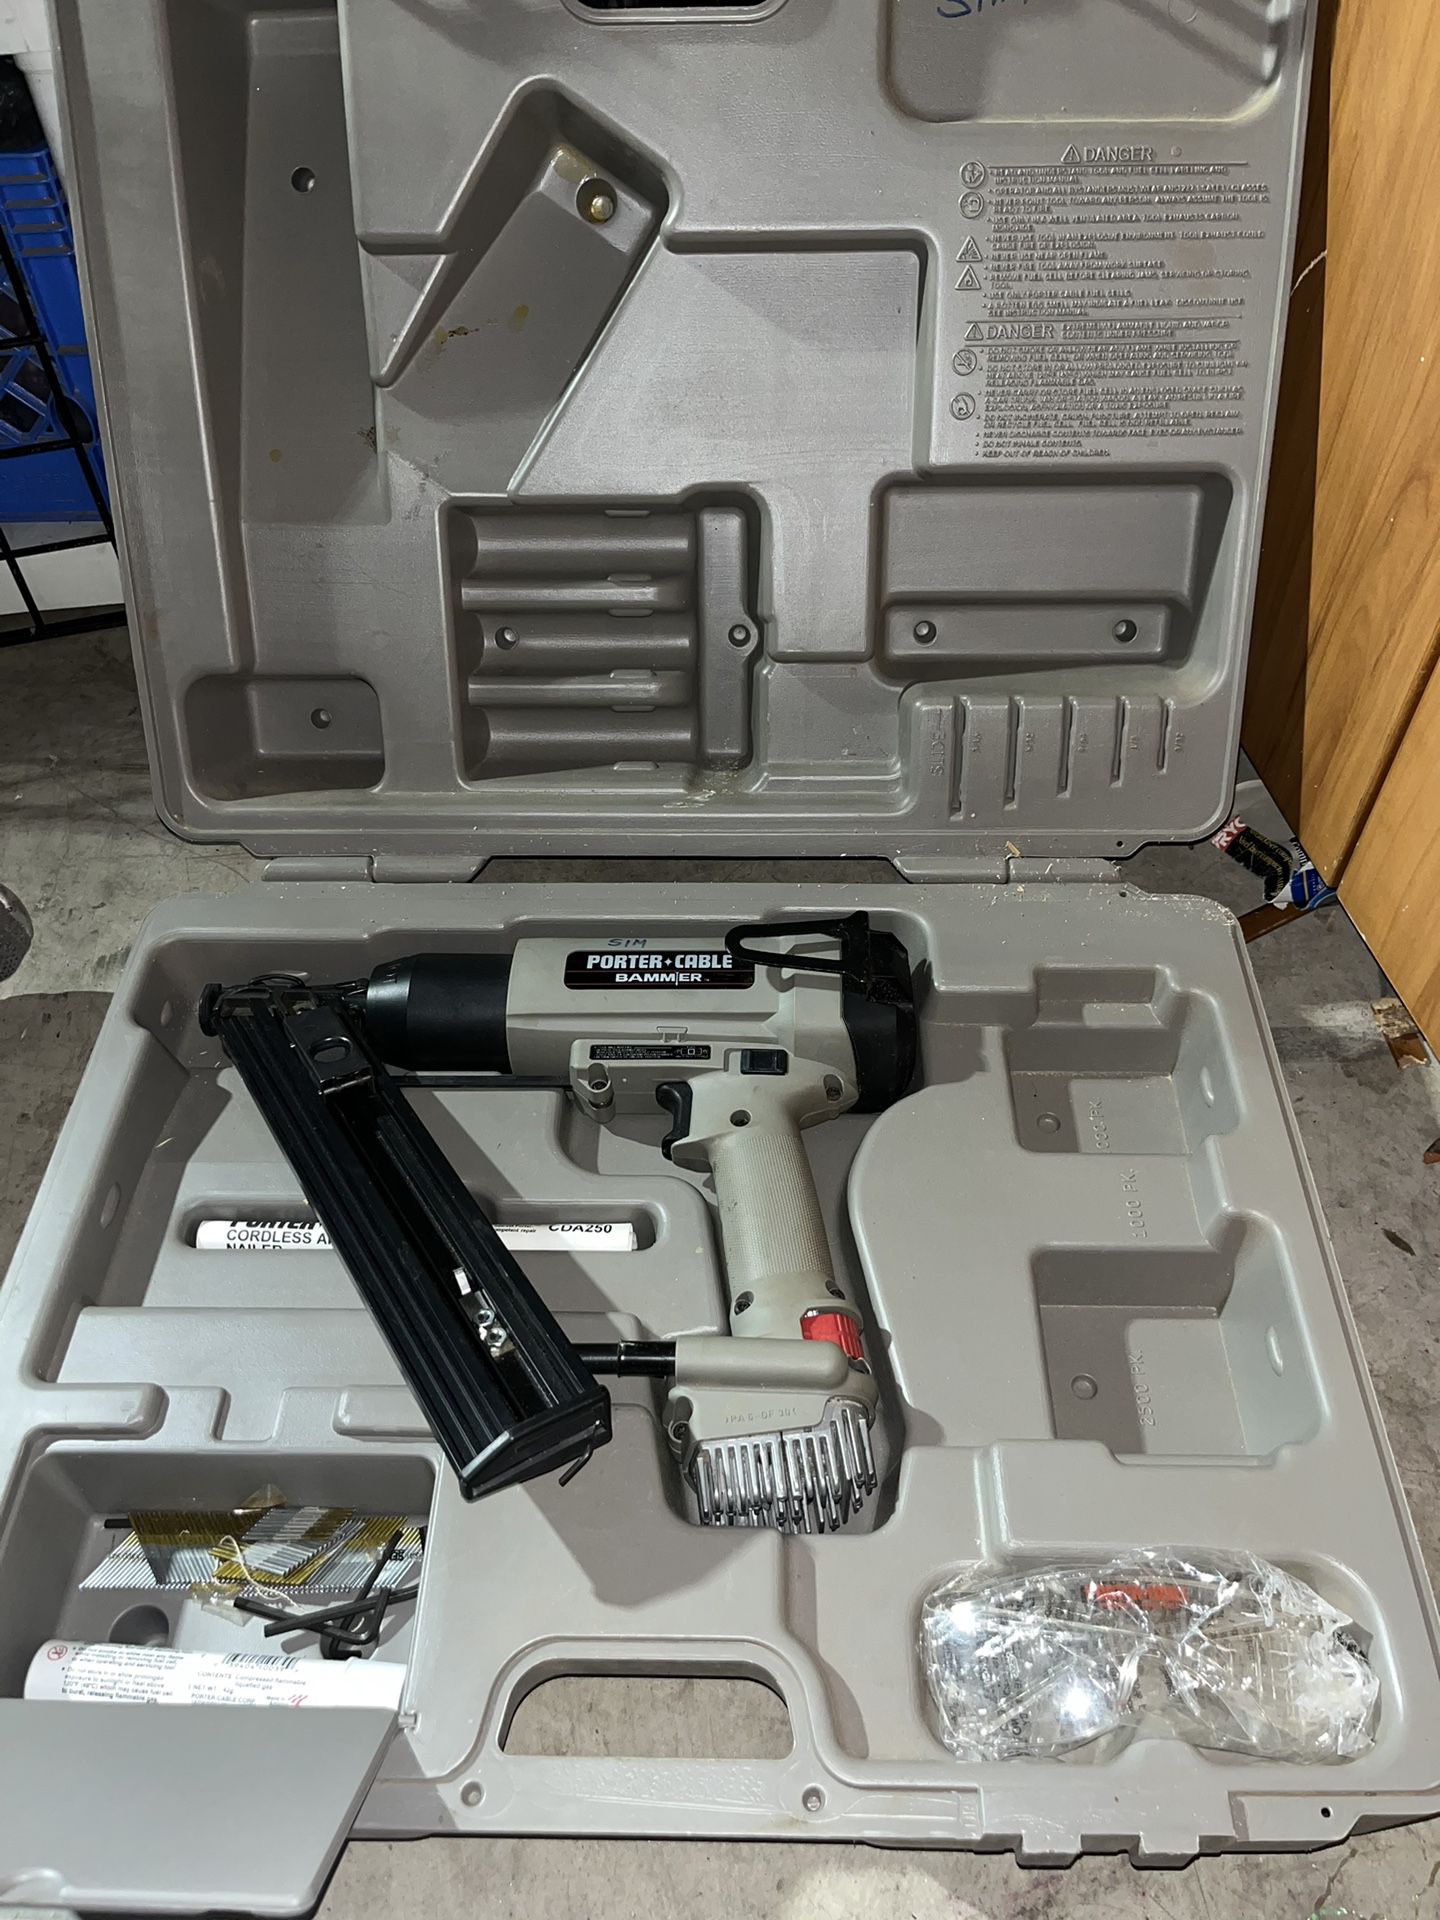 Porter Cable CFN250 Bammer Cordless Finish Nailer🚨 ACCEPTS CREDIT CARDS- 67th & Glendale